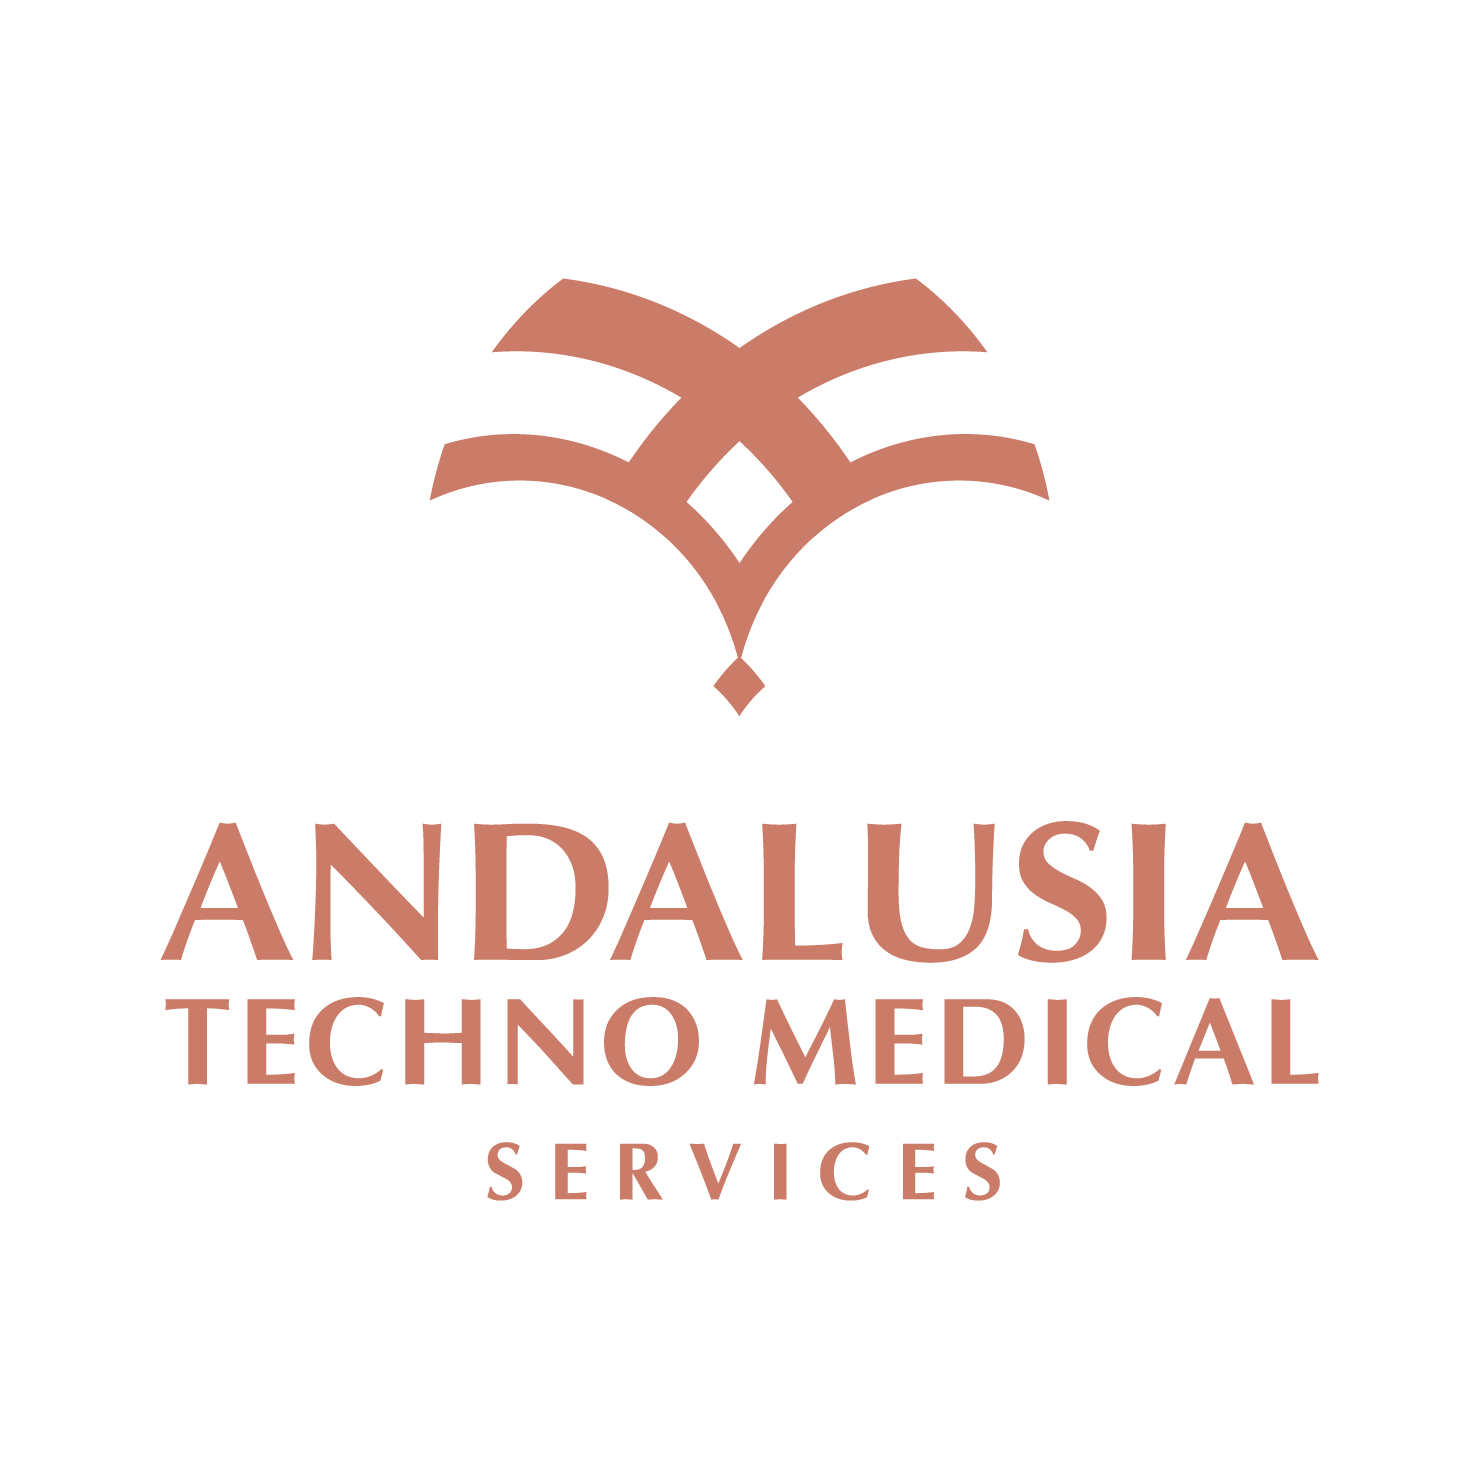 A.T.S Andalusia Techno-Medical Services